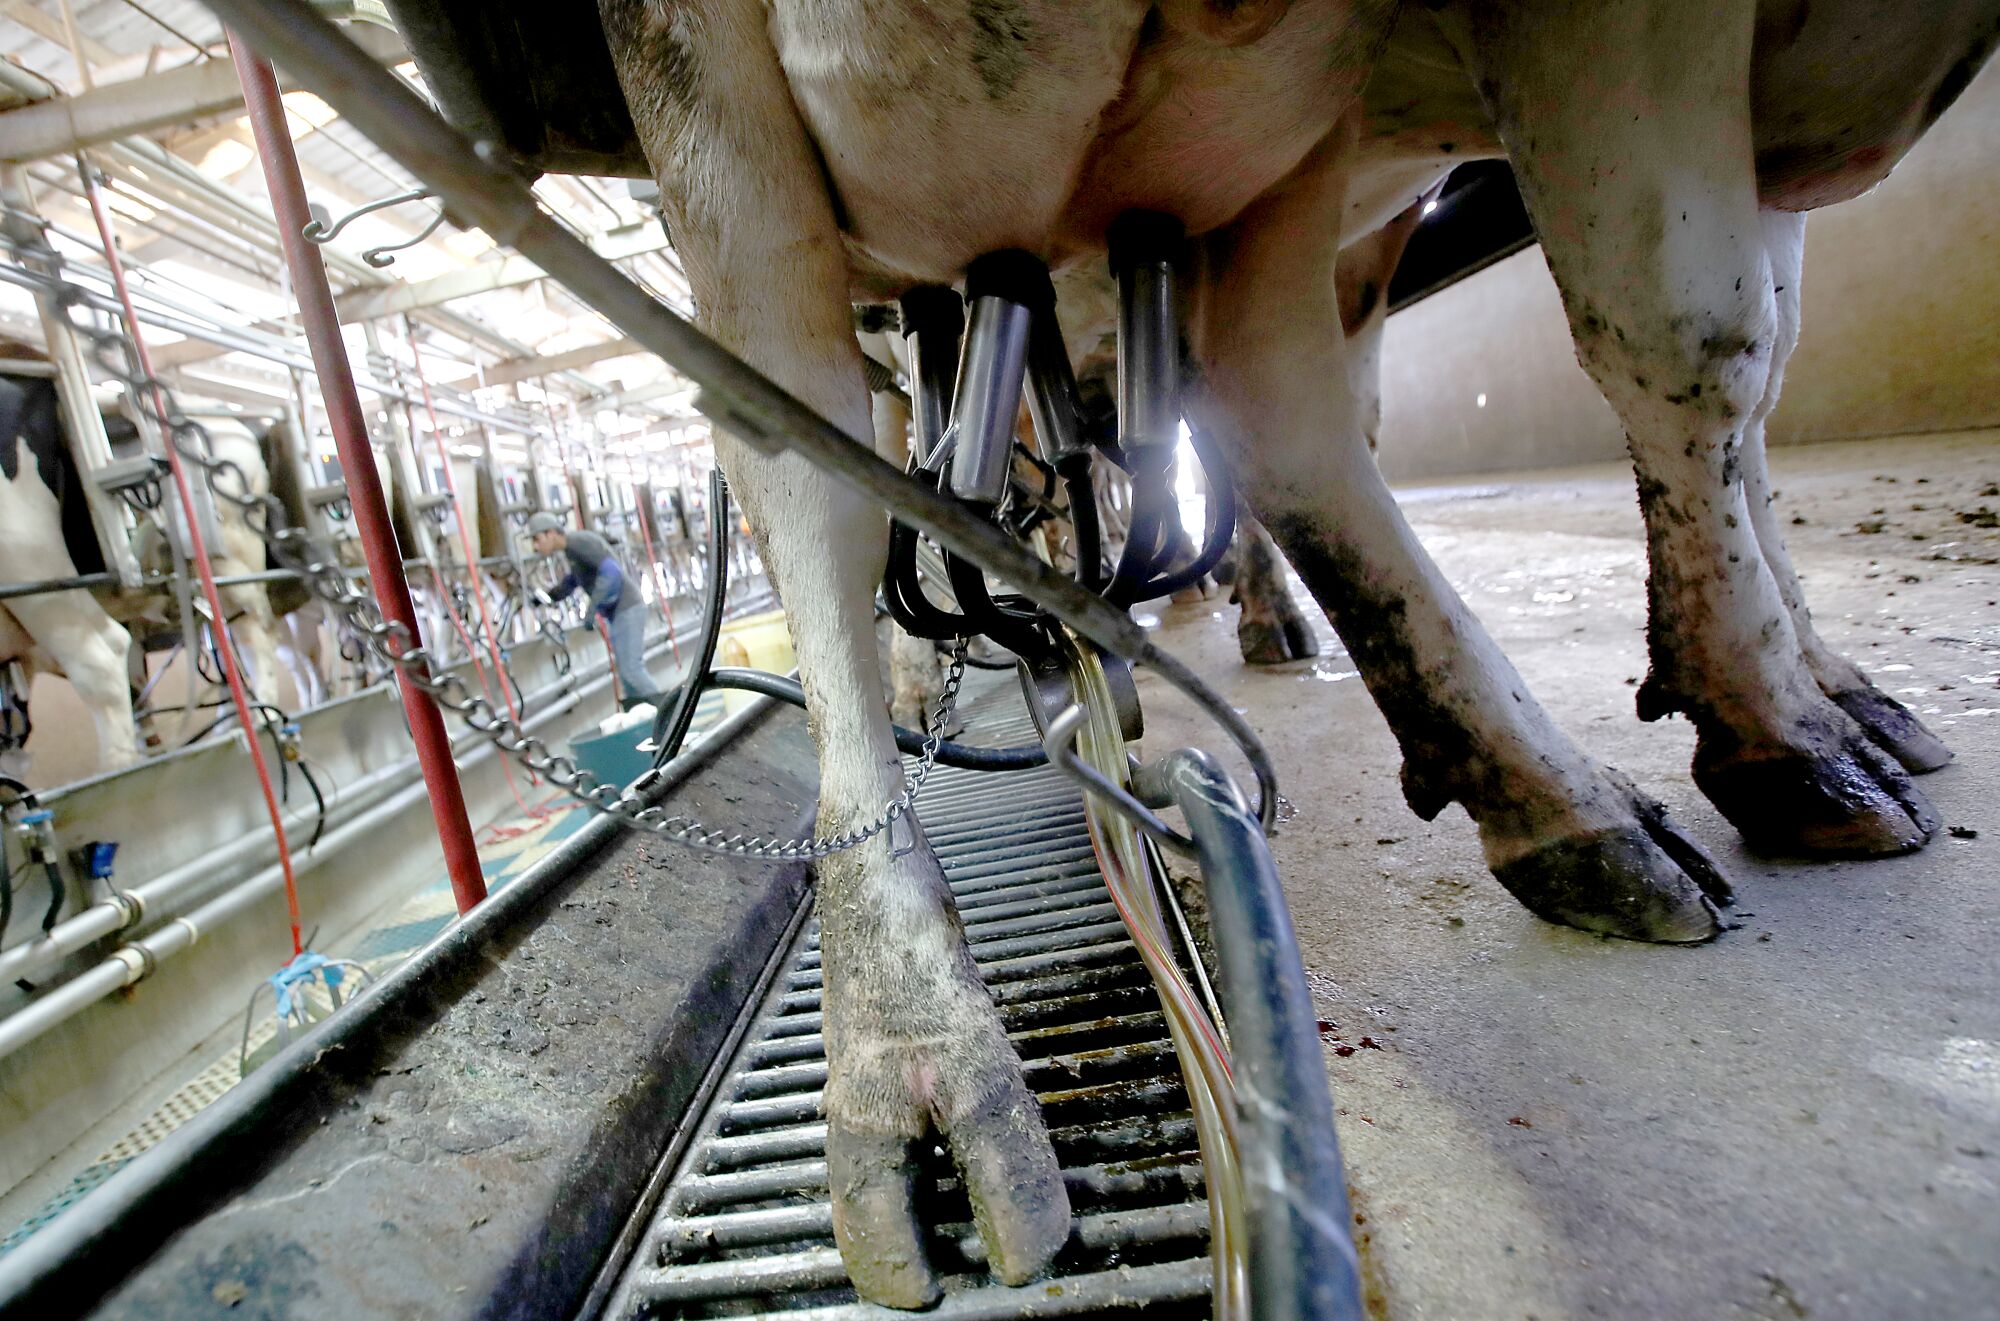 A close-up of udders being milked by a machine and cow legs.